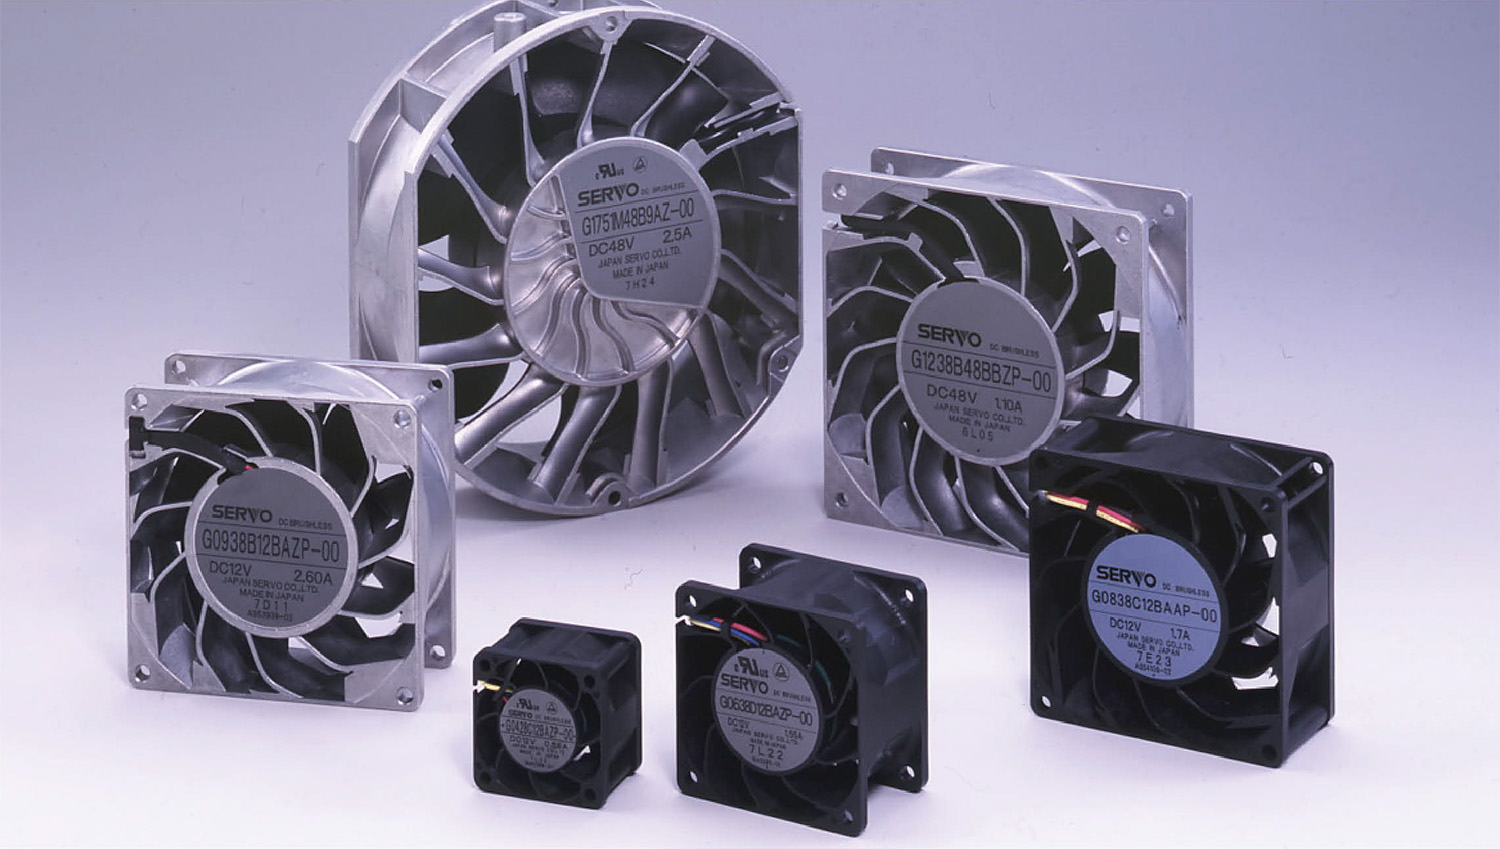 Super quiet and powerful blowers and centrifugal fans